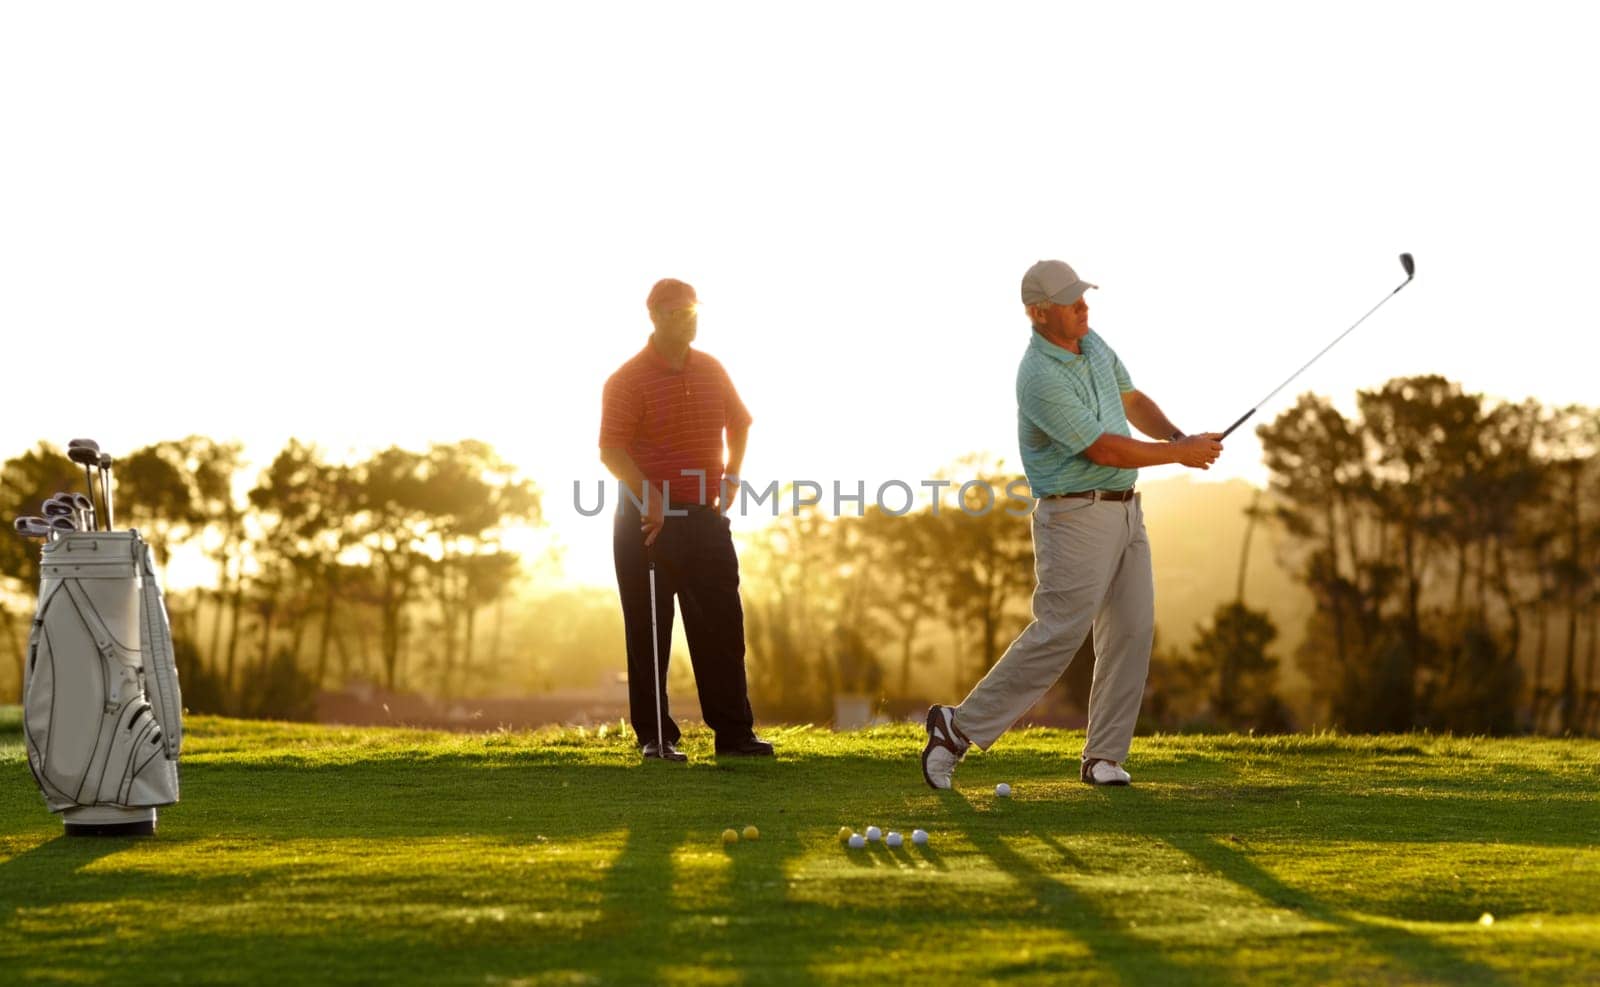 Sunset, golf and men on a course for training, competition or professional game. Fitness, summer and friends on the grass golfing during retirement for holiday, hobby and recreation at a club.